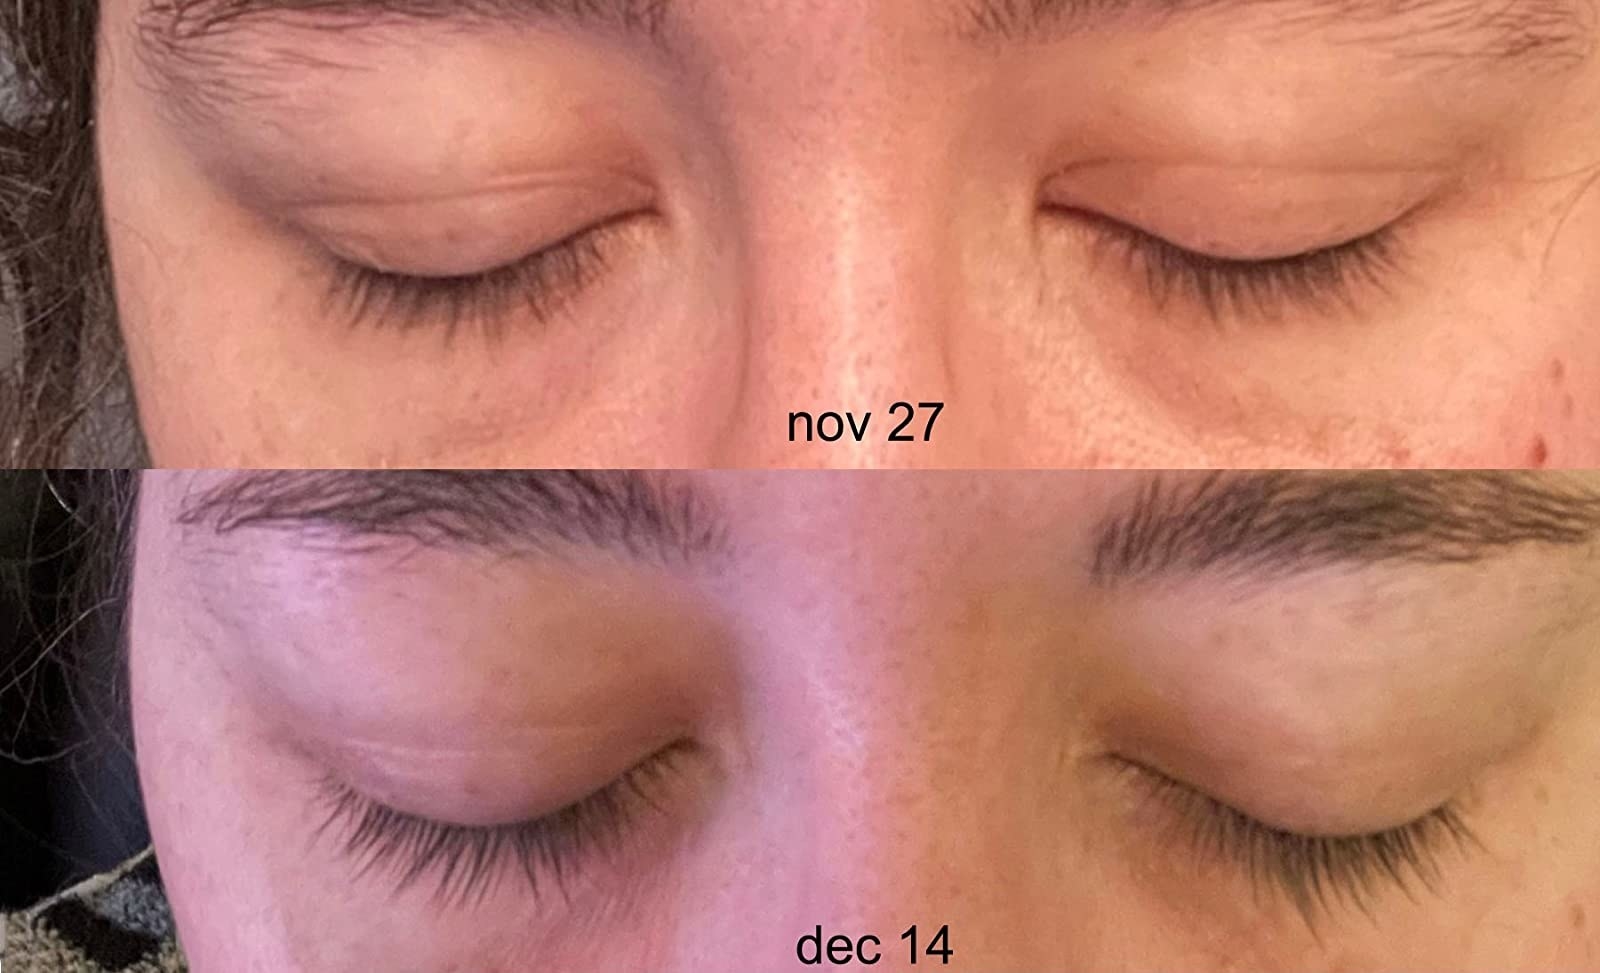 reviewer showing before and after of short lashes on Nov 27 and slightly longer lashes on Dec 14